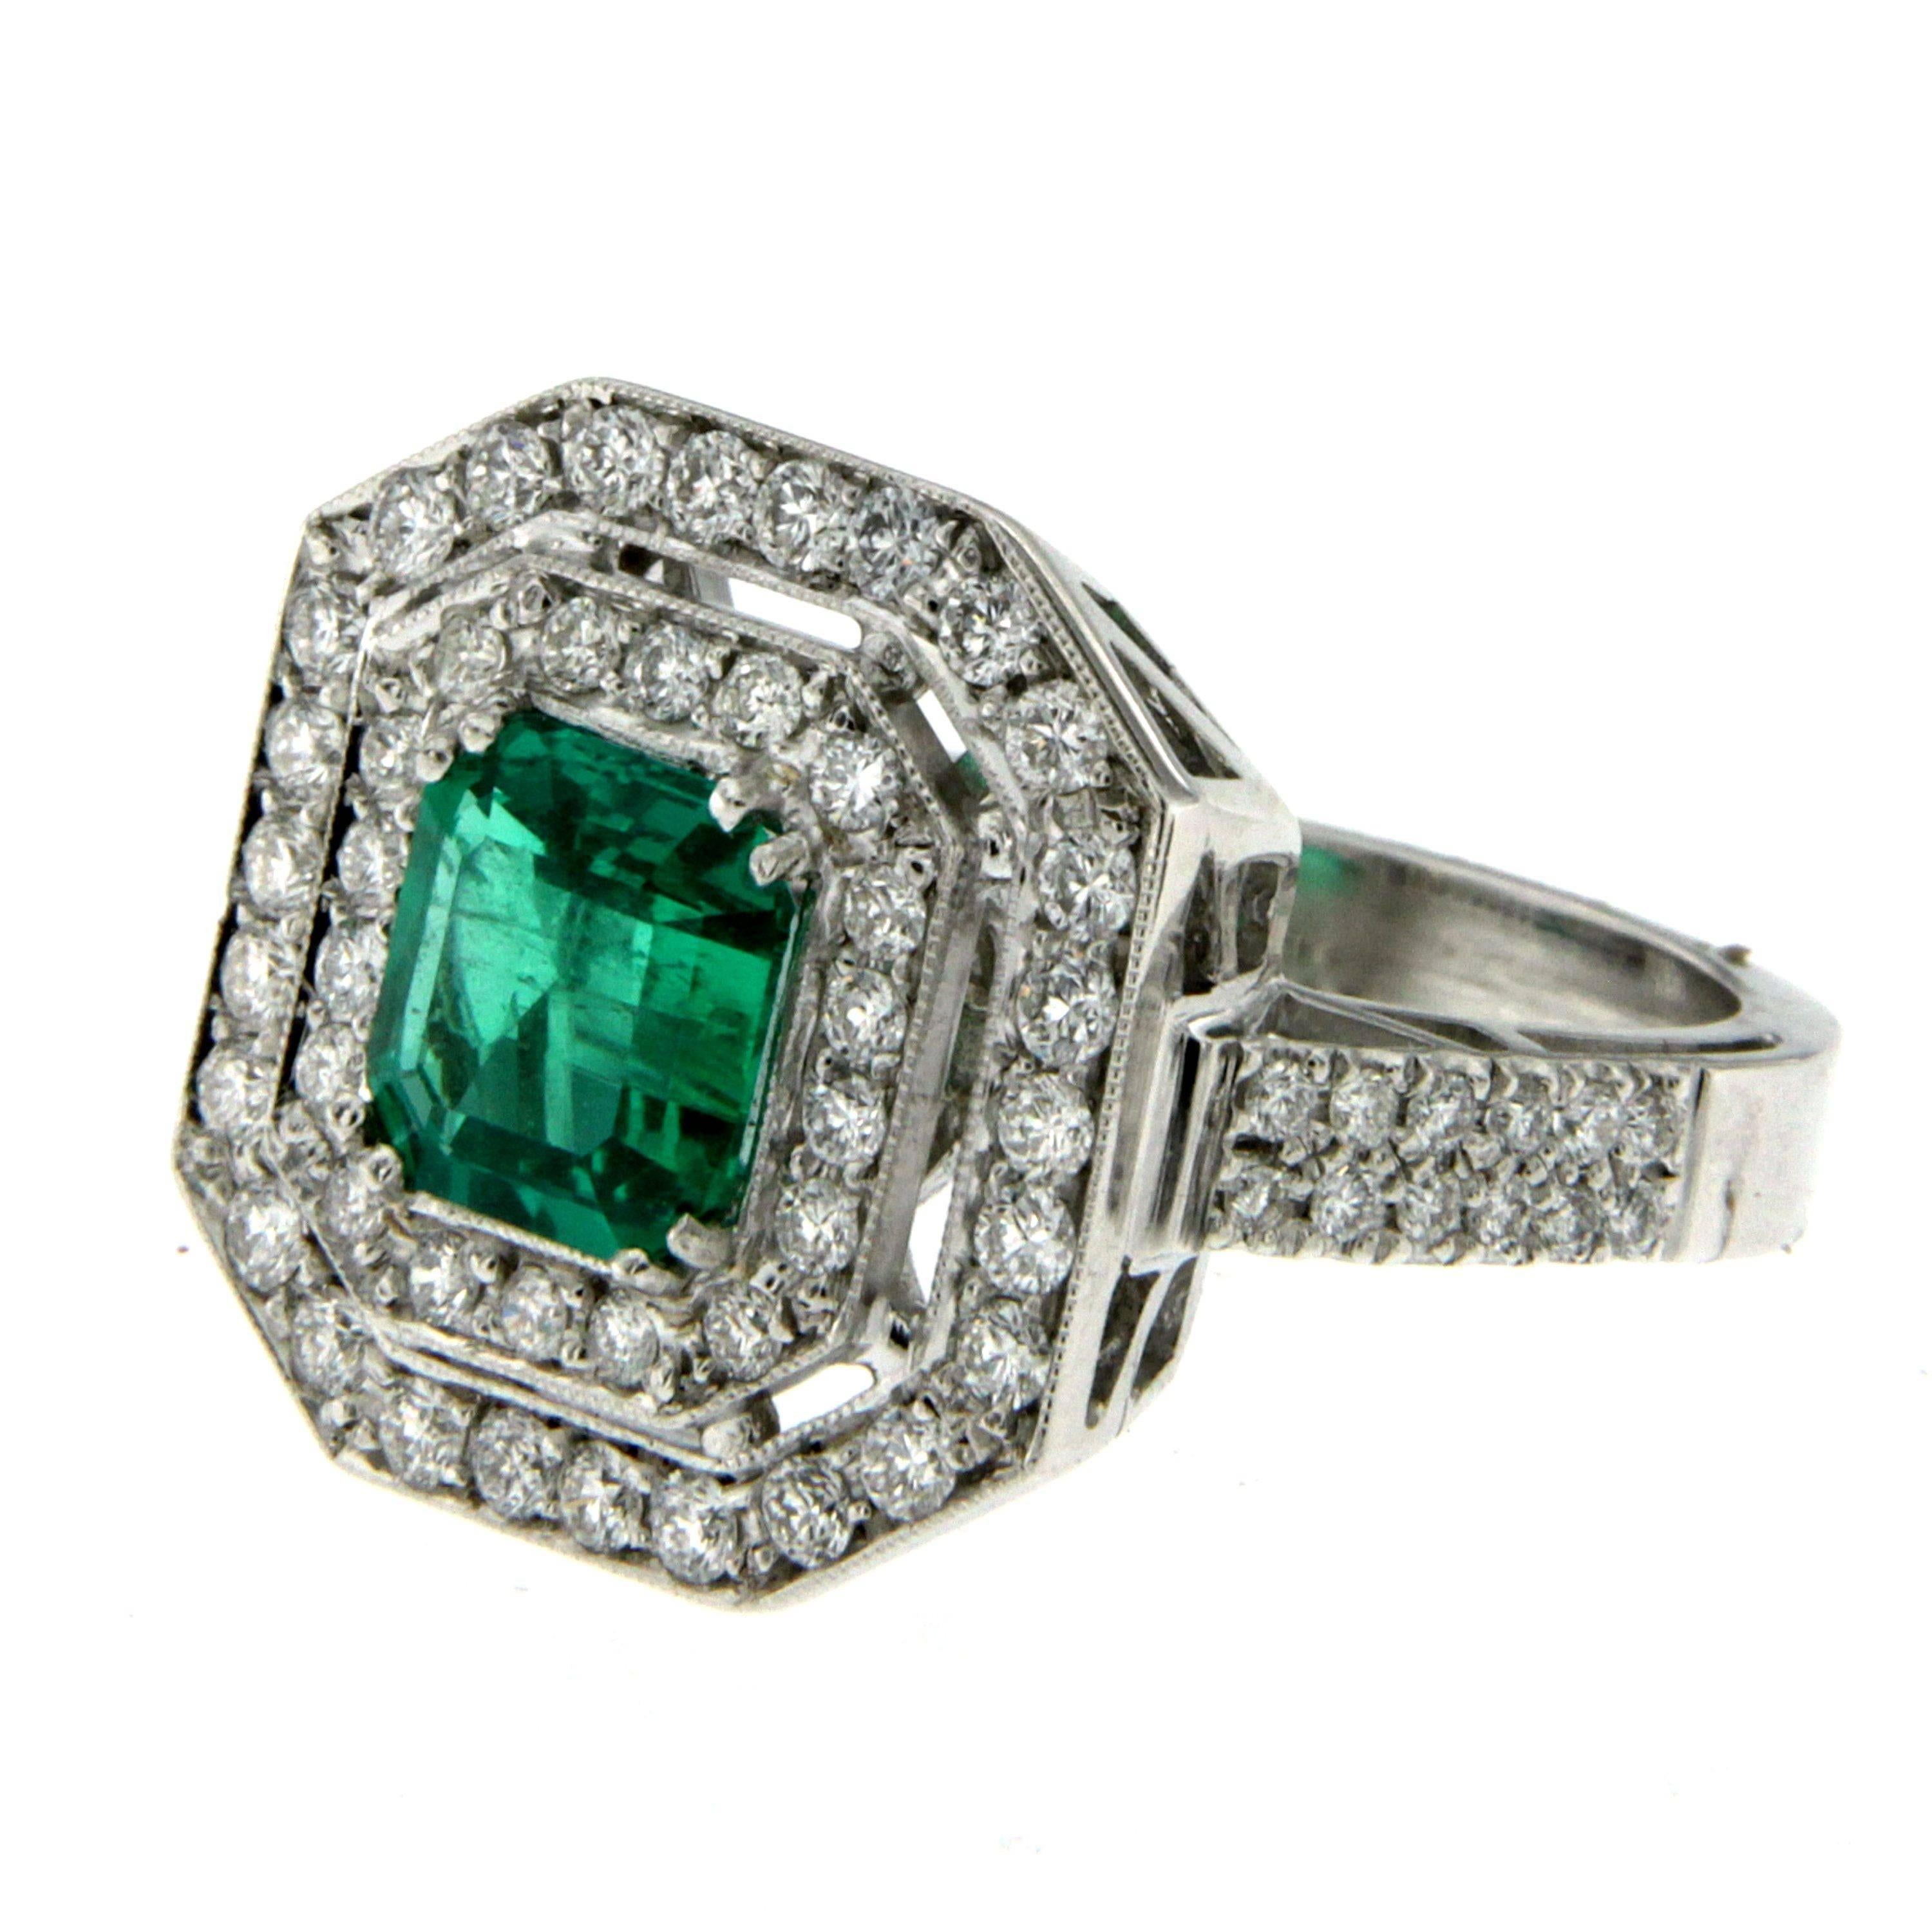 This beautiful handmade Emerald & Diamond Ring is crafted in solid 18k white gold and it weighs approx. 9.00 grams.
The center Emerald is certified by the American Gemological Laboratories (AGL) as a 1.67 cts, emerald cut, natural Beryl Colombian